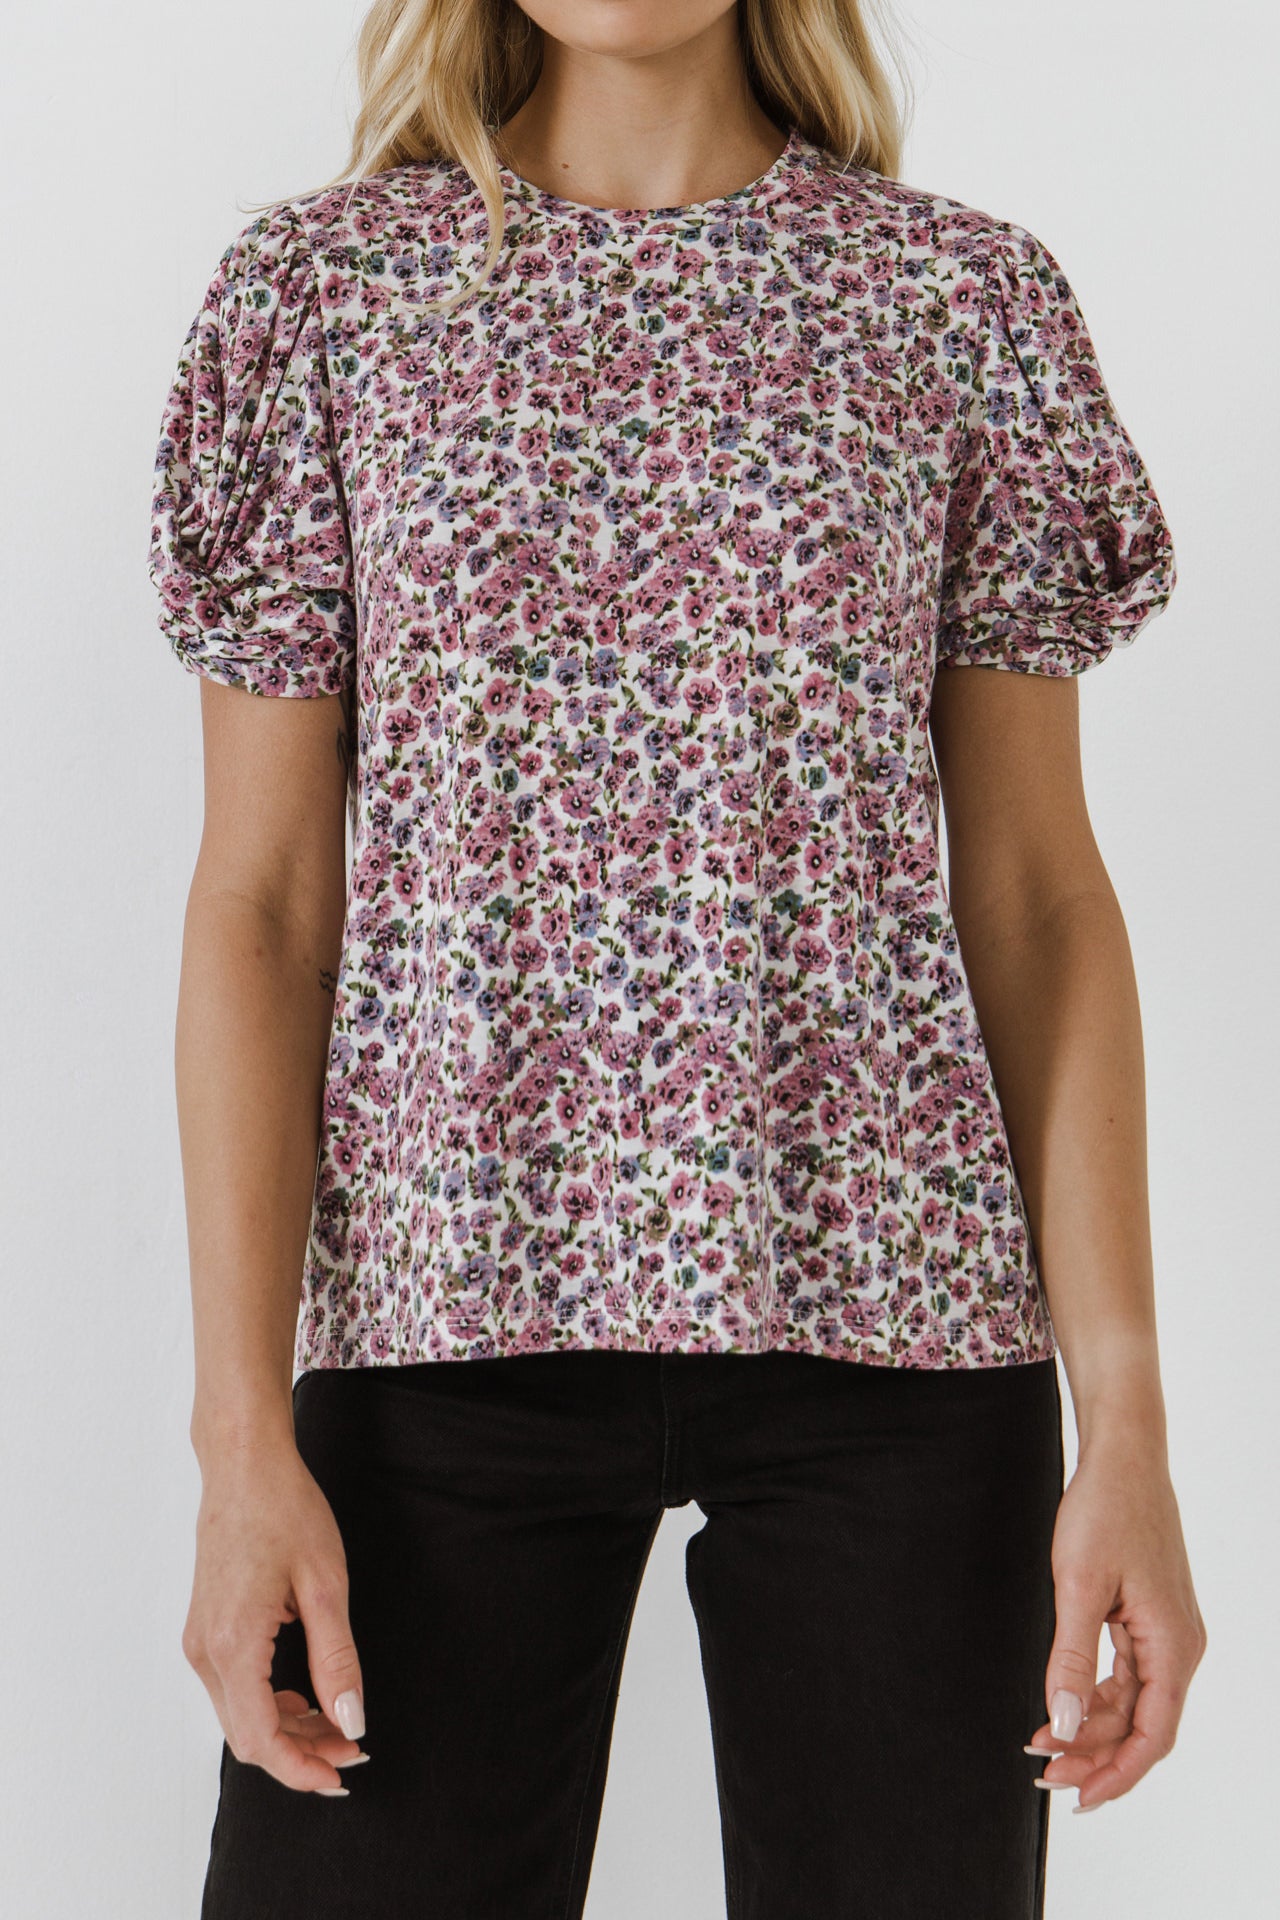 FREE THE ROSES - Floral Twist Sleeve Detail Knit Top - TOPS available at Objectrare